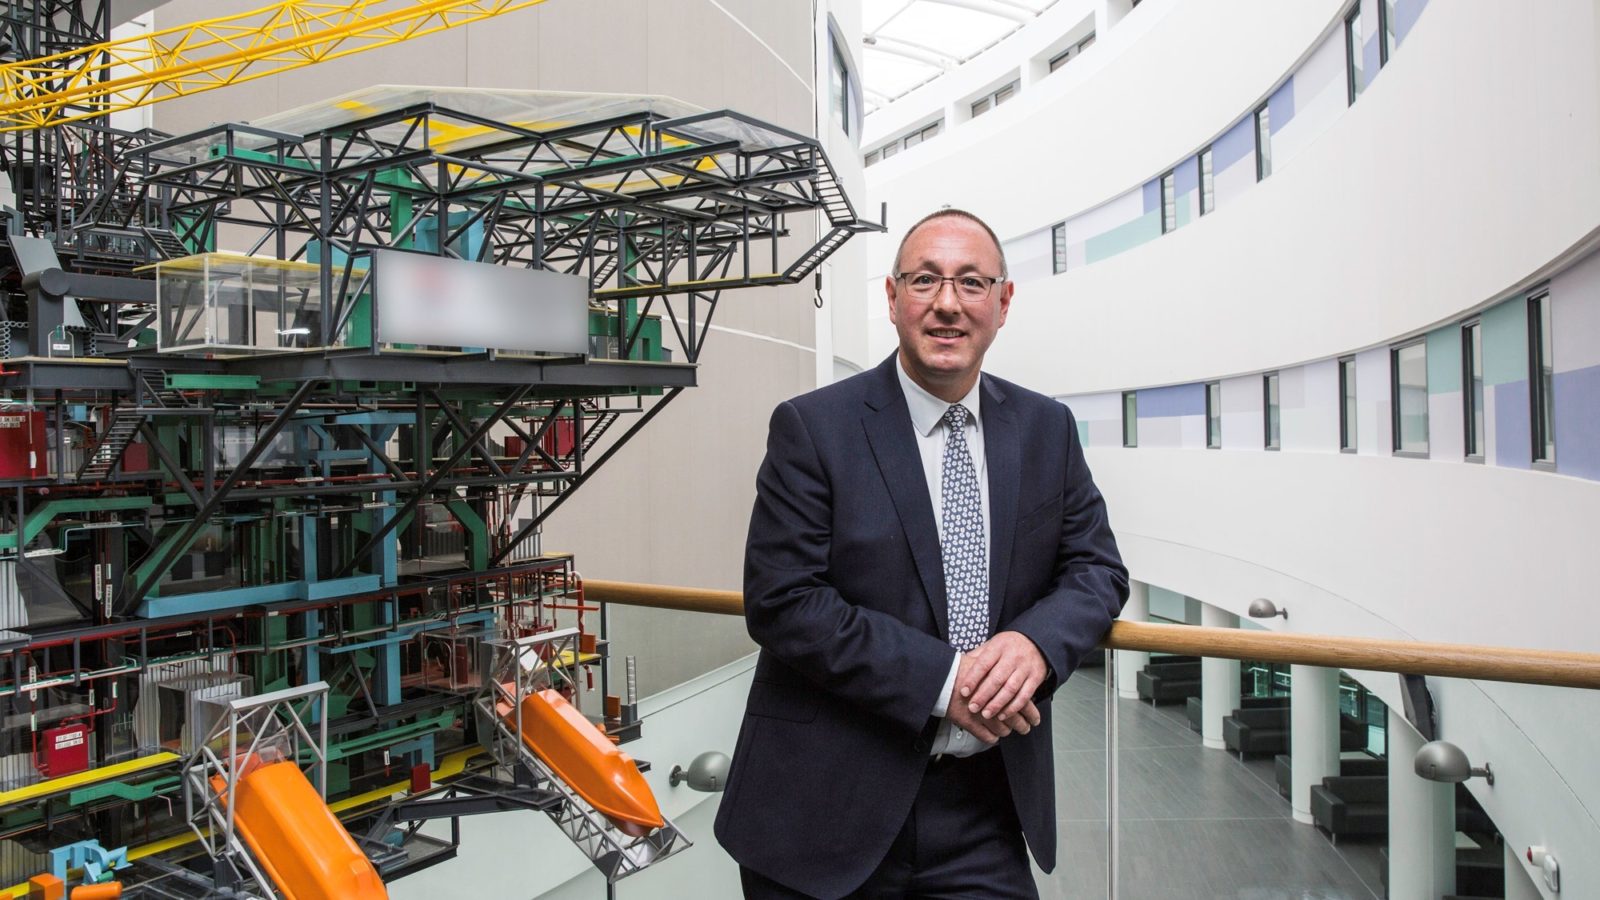 Director of RGU's Energy Transition Institute to speak at Chamber breakfast